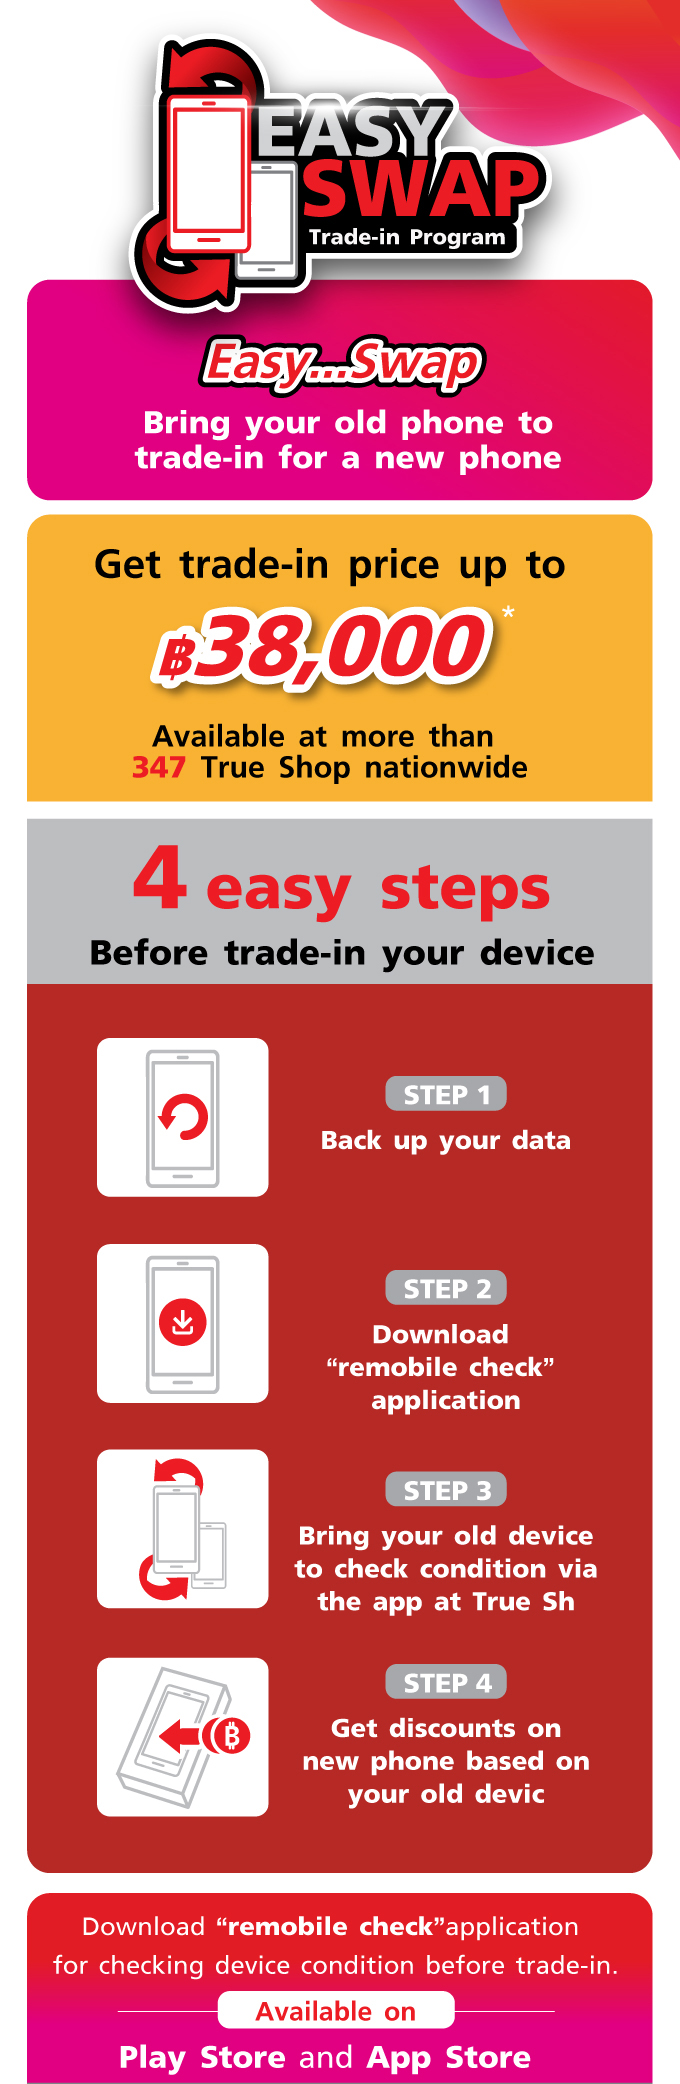 Easy swap. Trade-in program. Bring your old phone to trade-in for a new phone